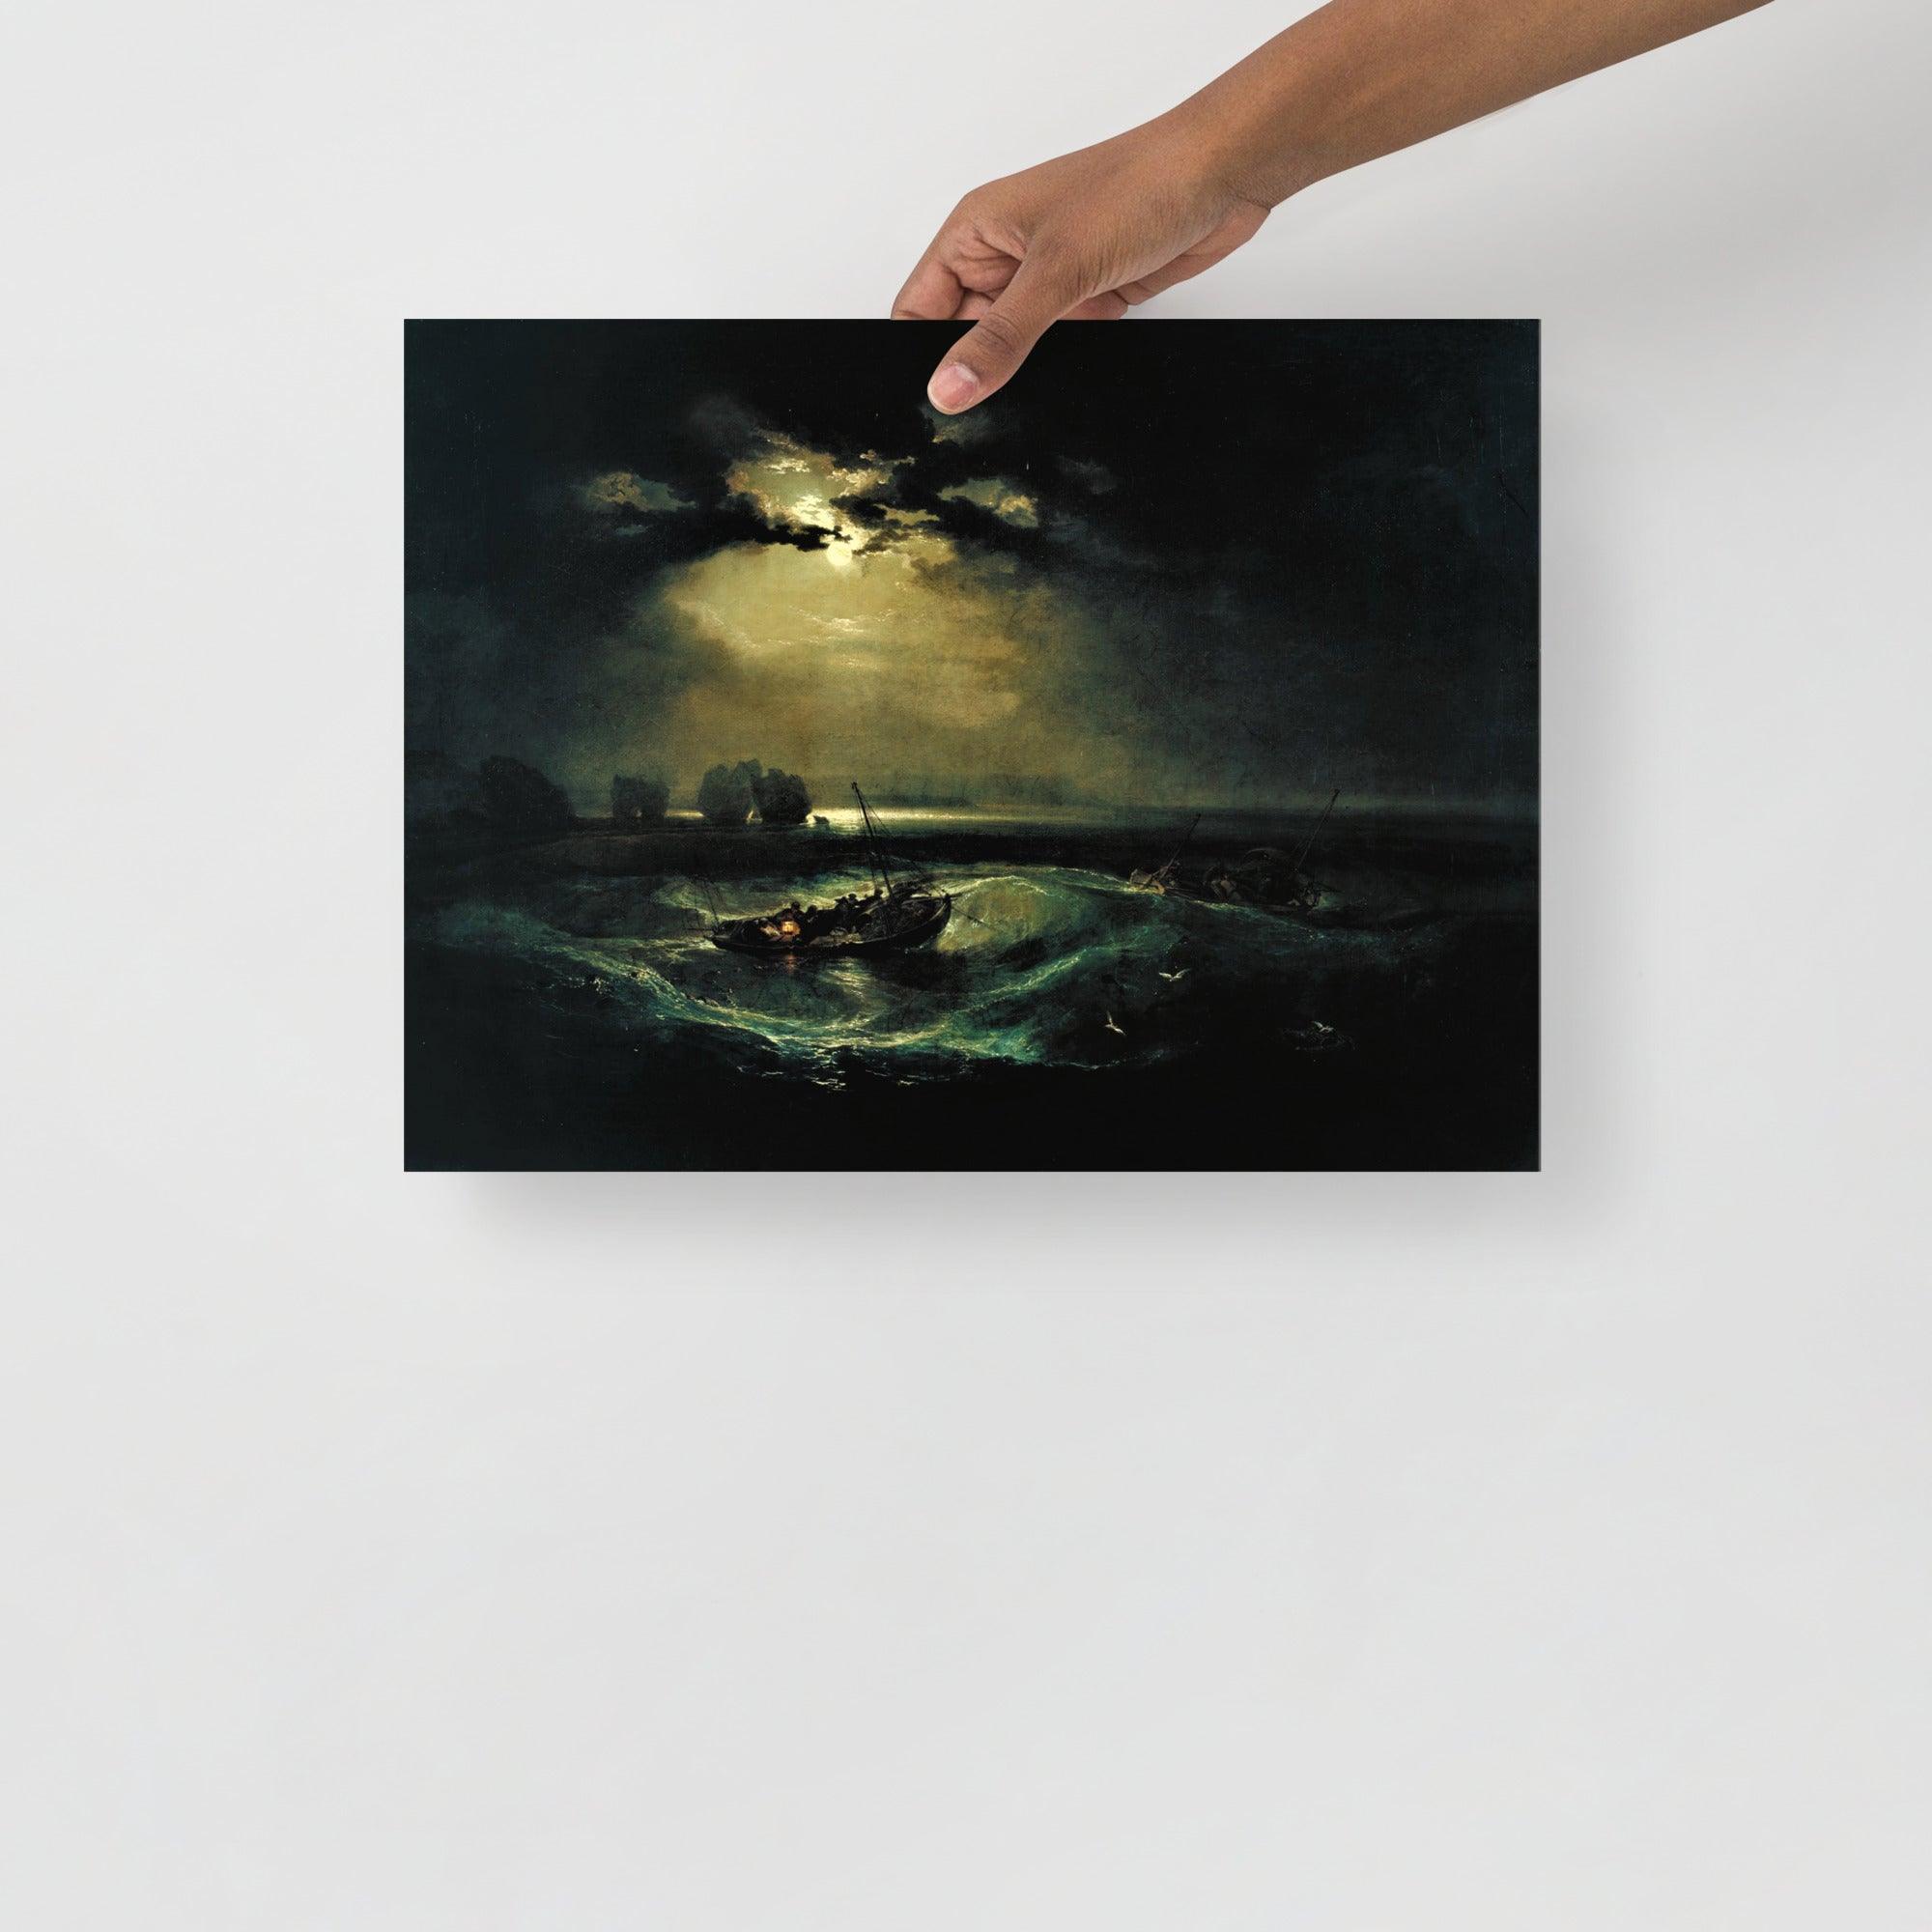 A Fishermen at Sea by William Turner poster on a plain backdrop in size 12x16”.